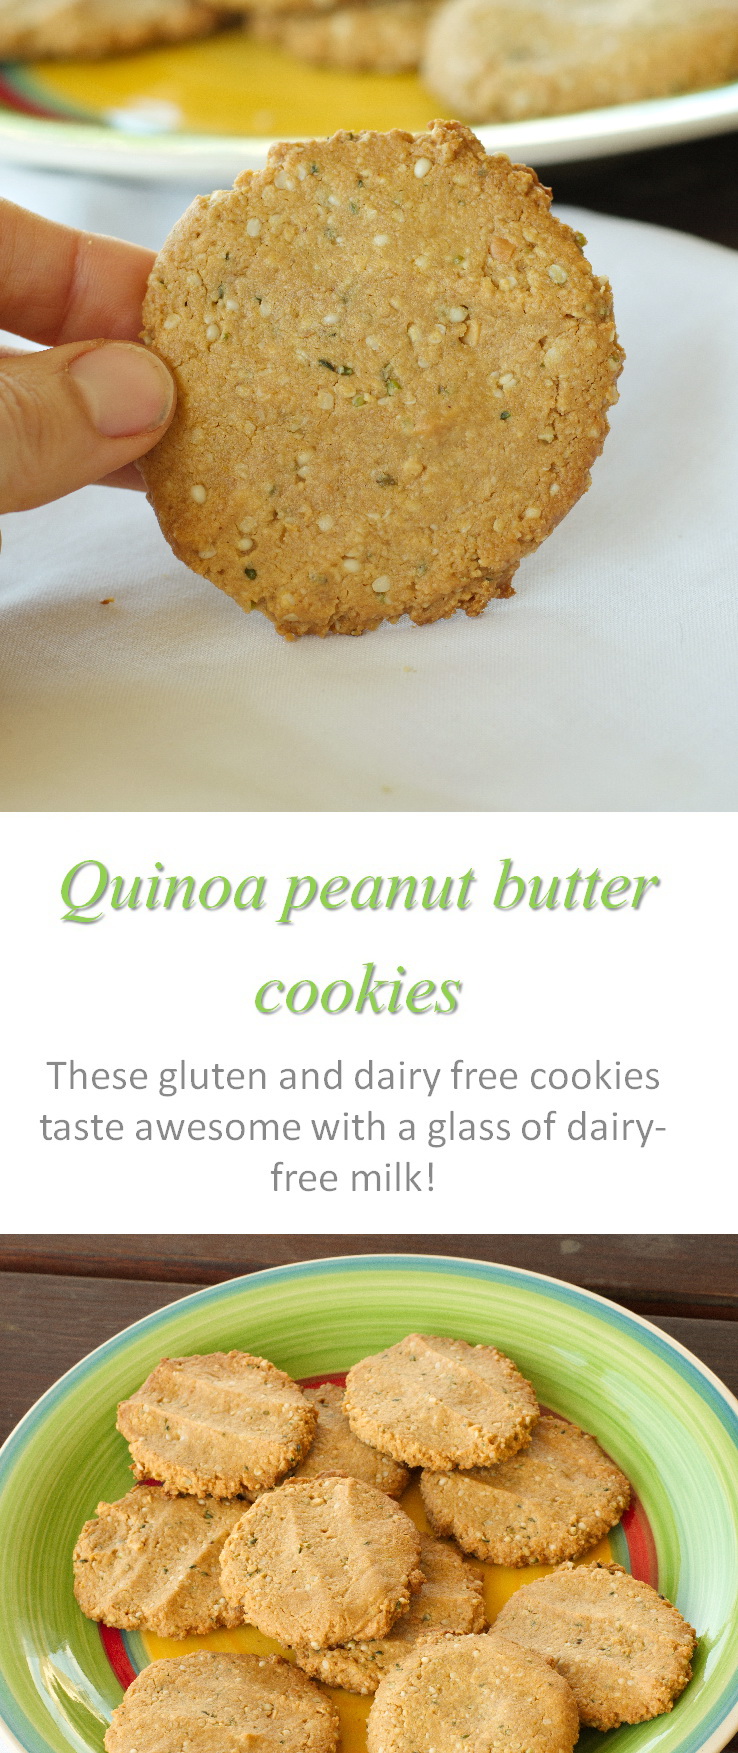 These quinoa peanut butter cookies are chewy, moist, gluten and dairy-free with no eggs - but so yum! #quinoa #cookies #cookathome #glutenfree #dairyfree #vegan